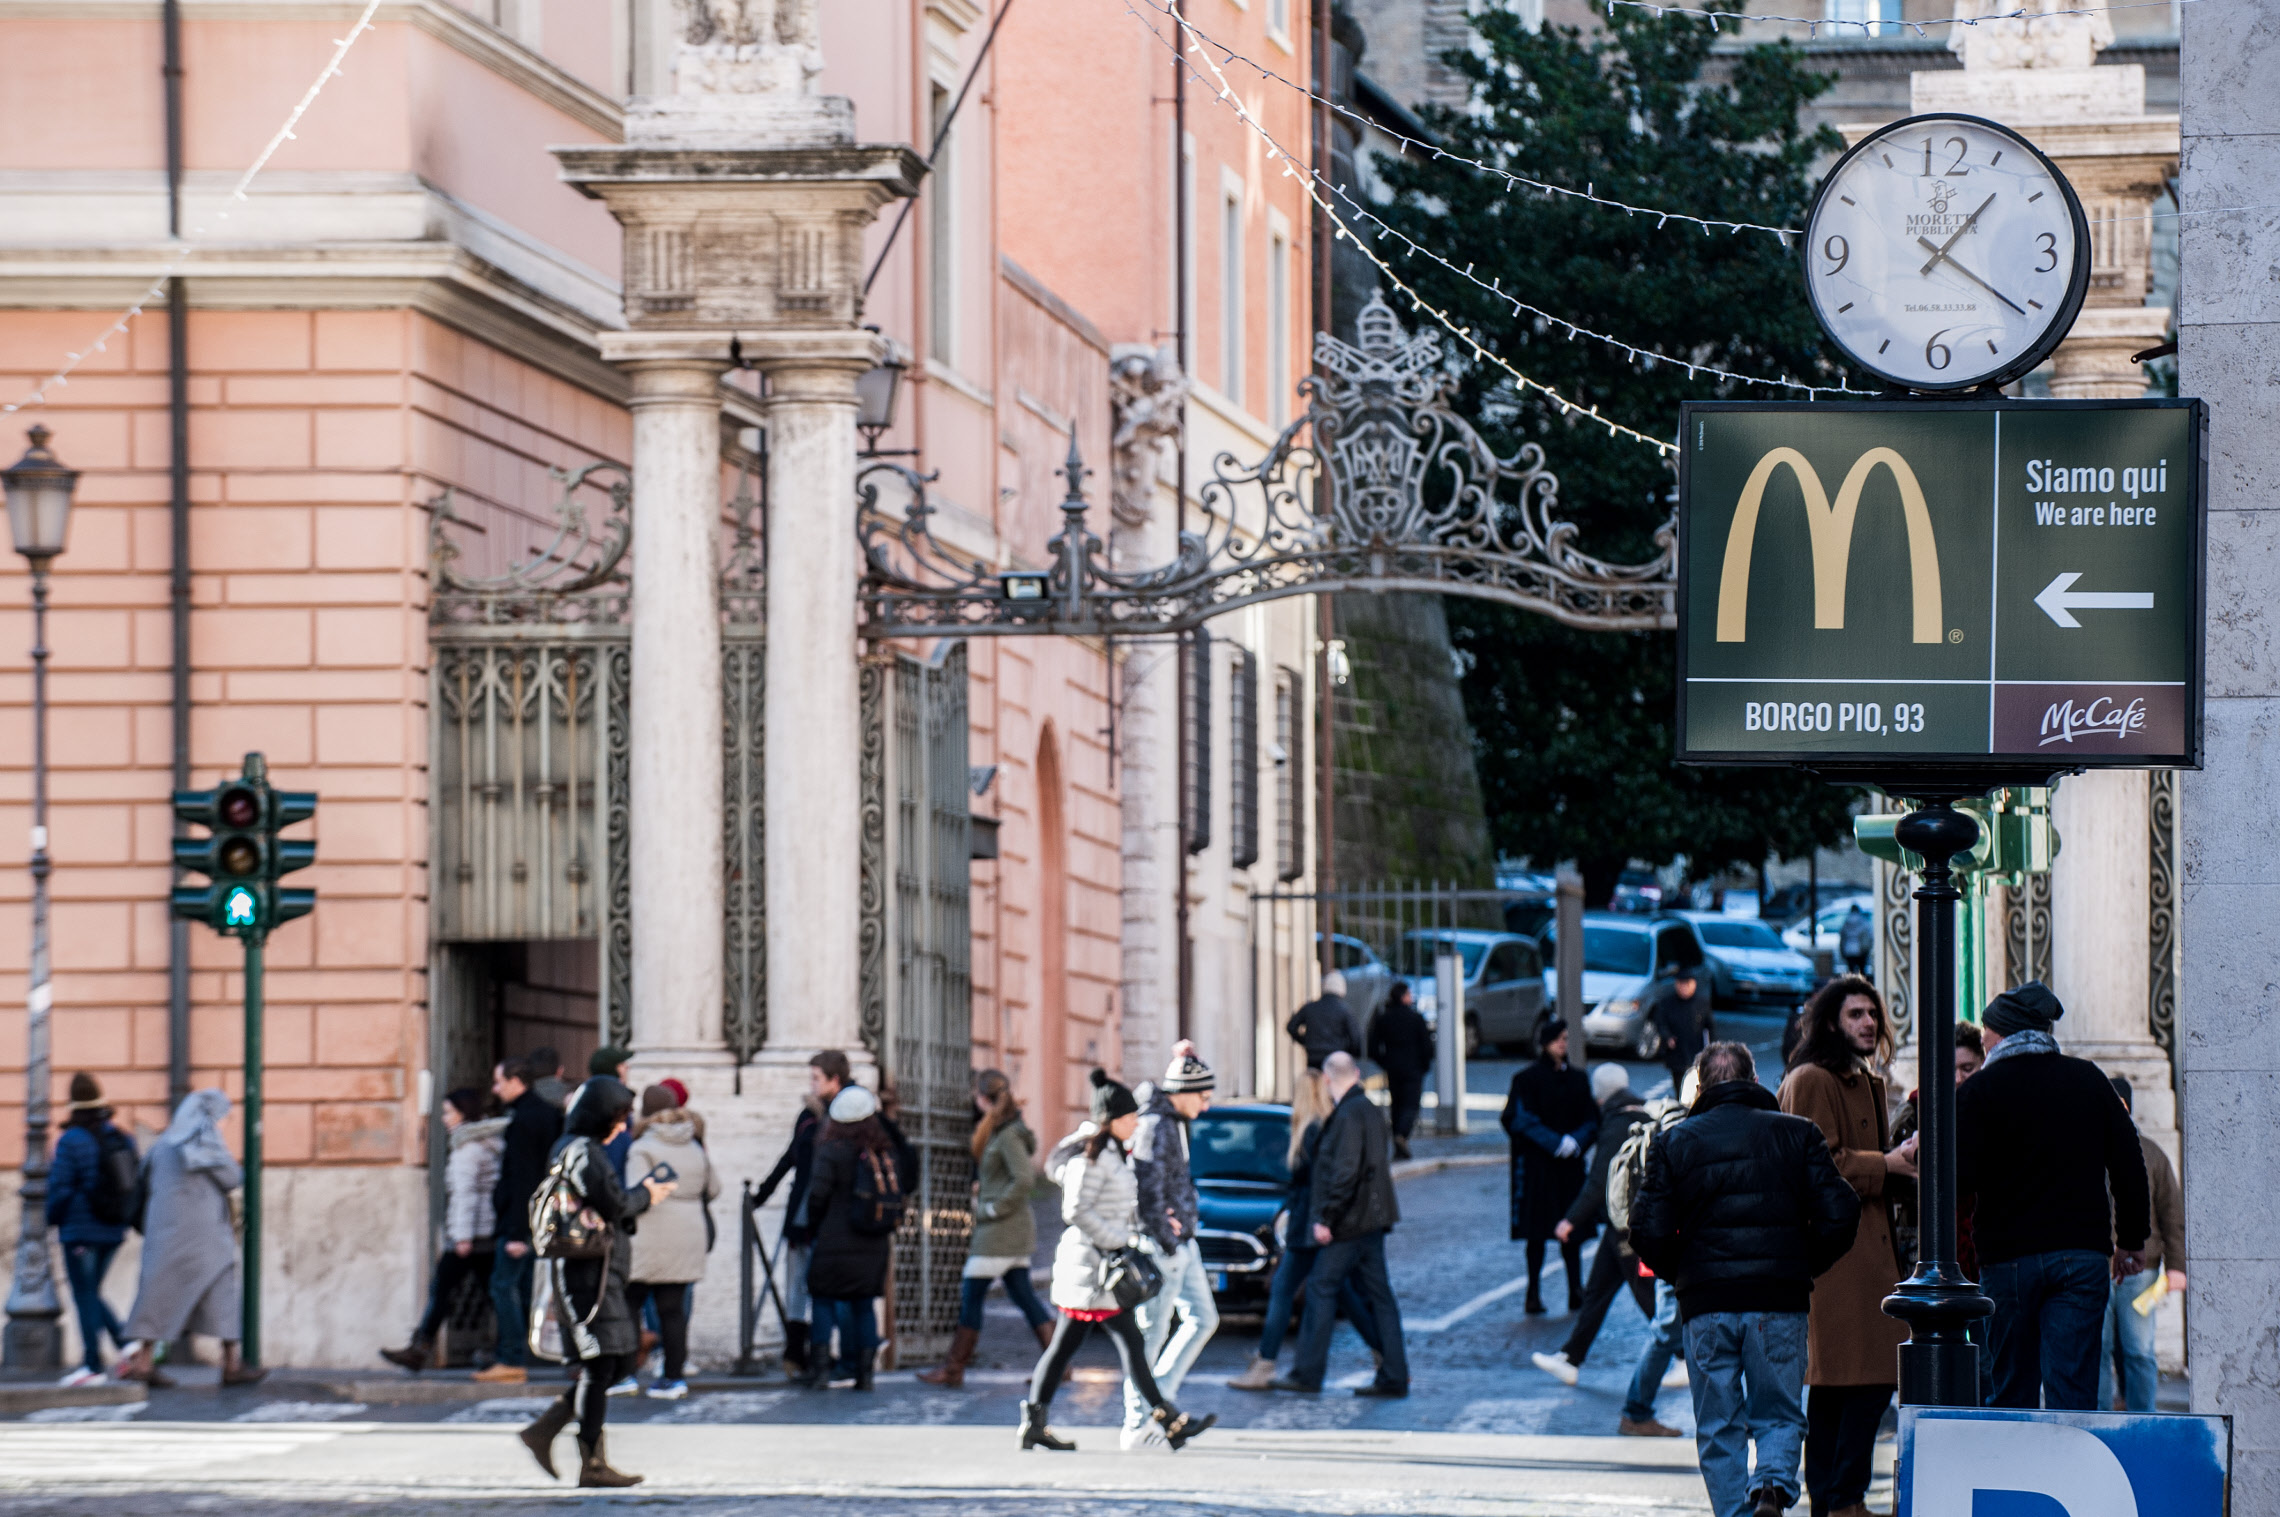 January 5 2017 : A sign showing the direction of a McDonald restaurant is seen near an entrance of the Vatican in the background.